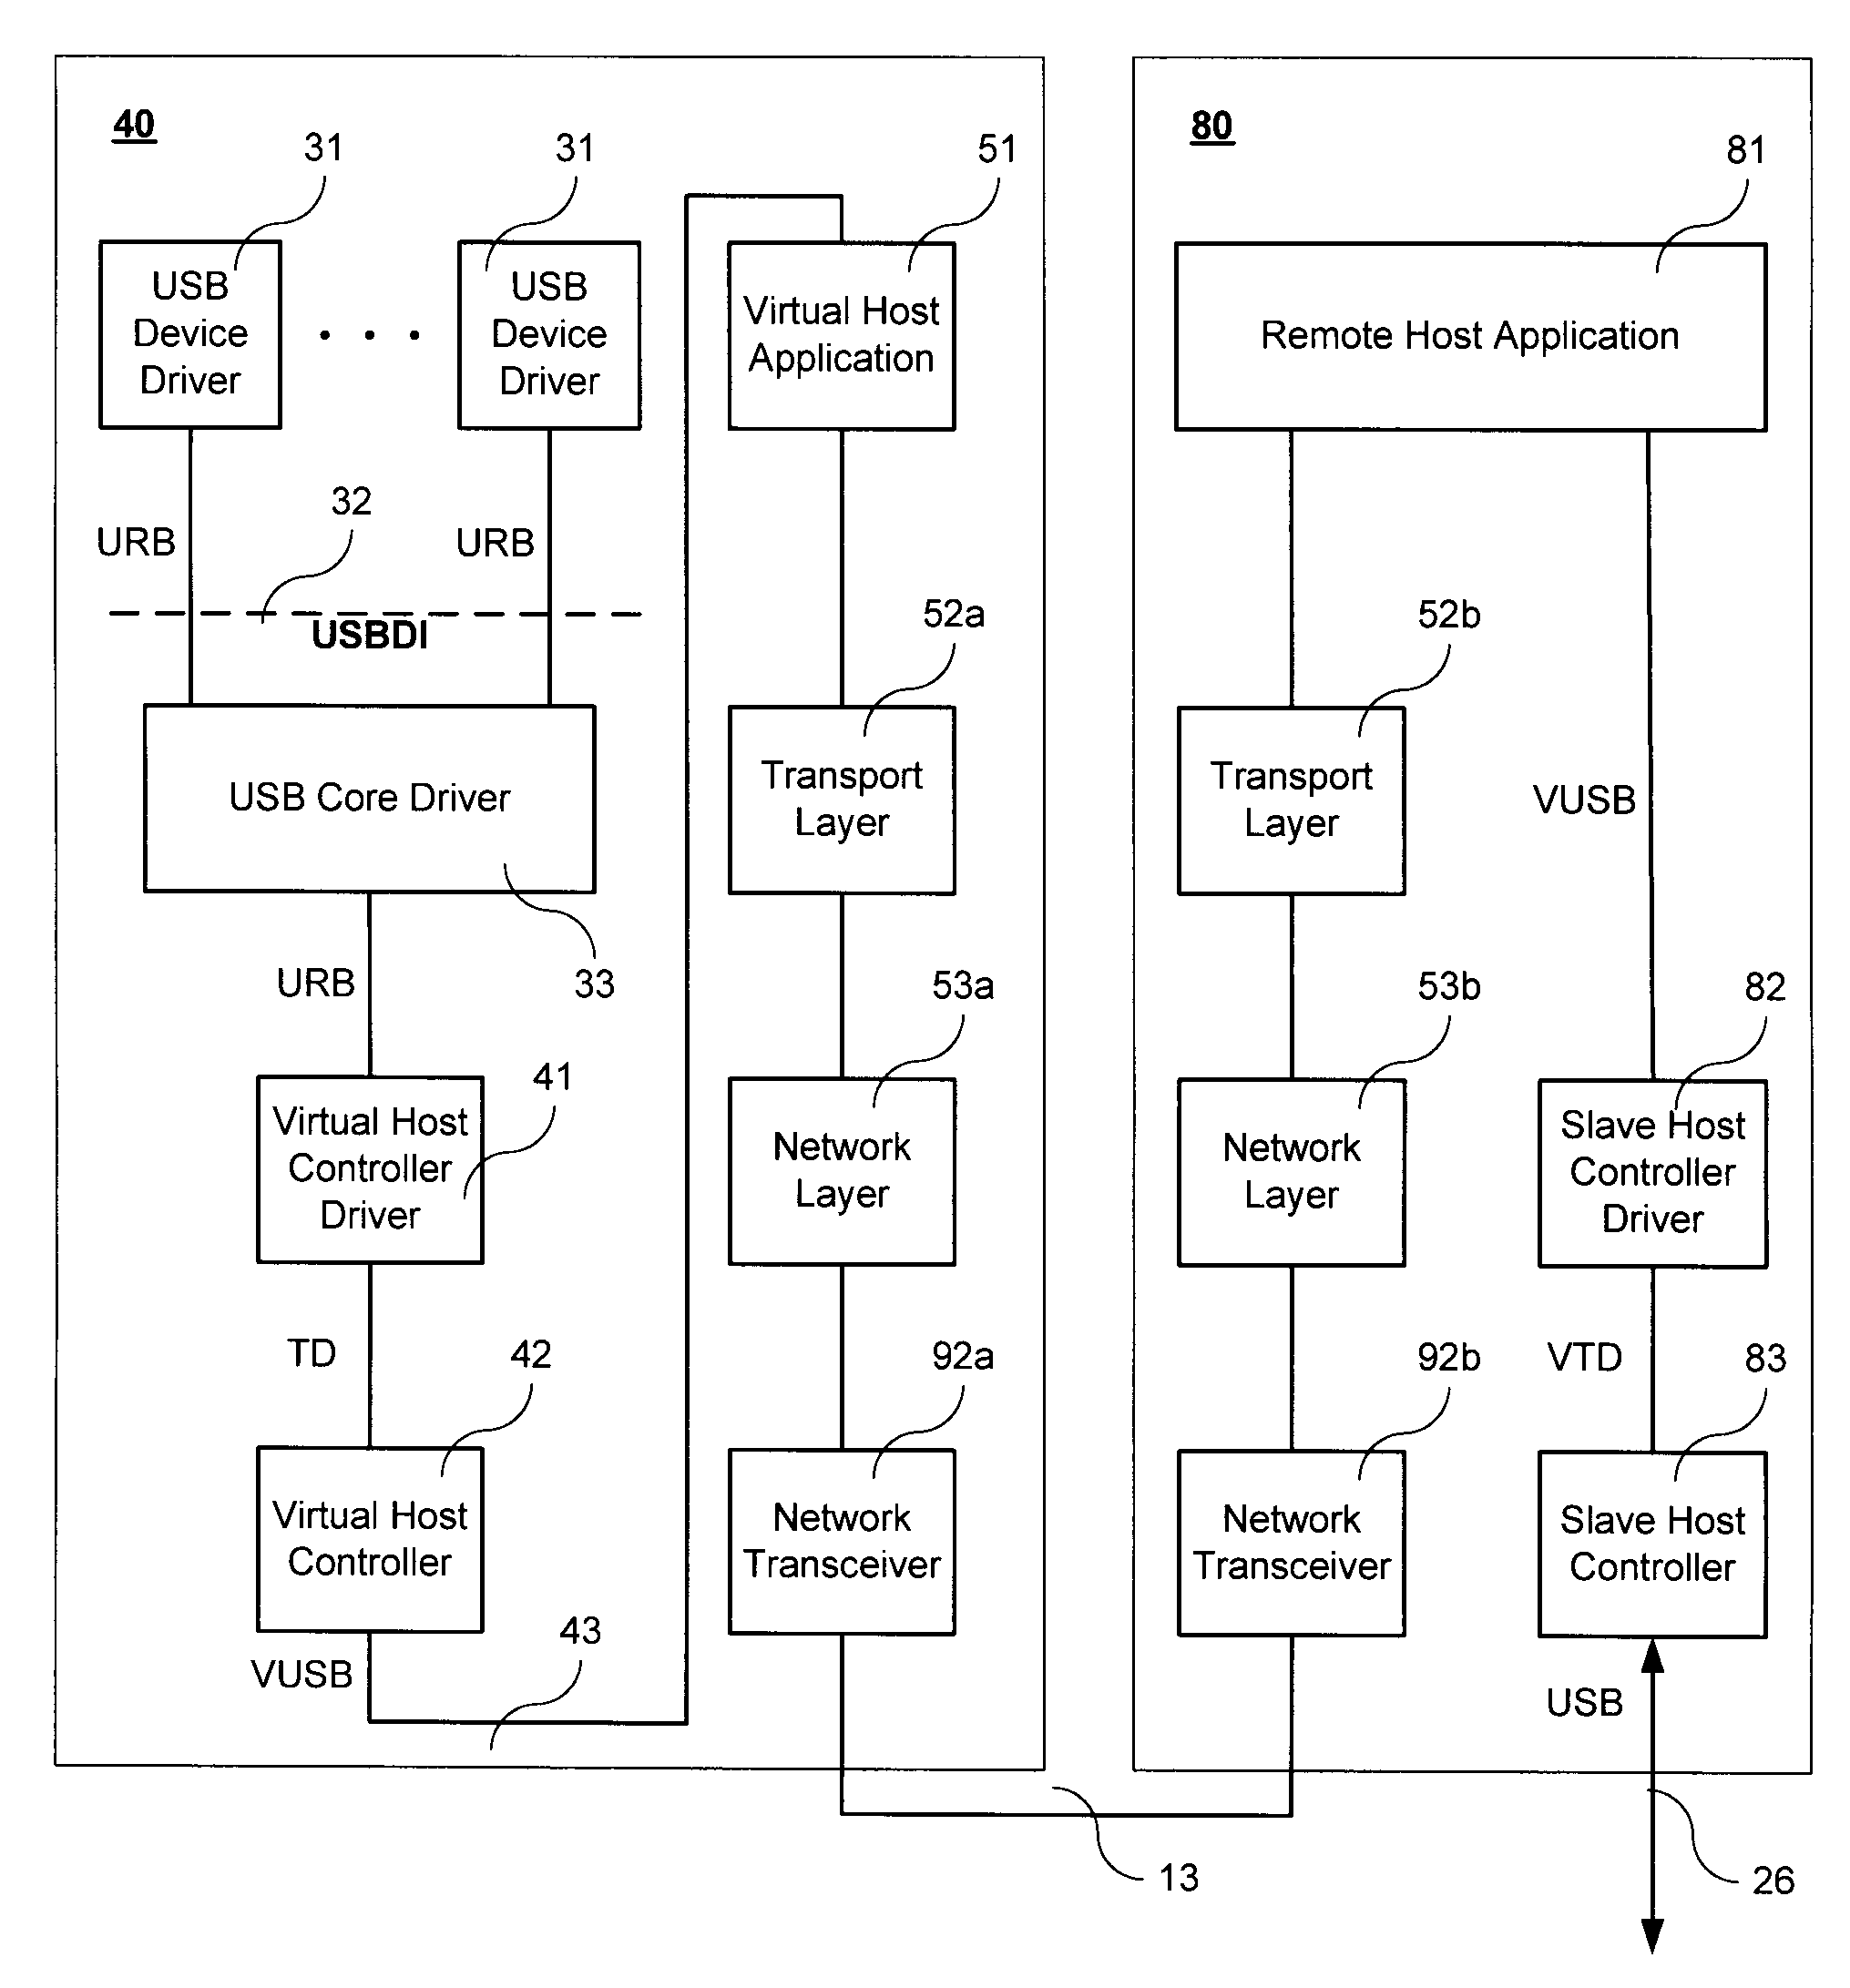 Method and apparatus for connecting USB devices to a computer